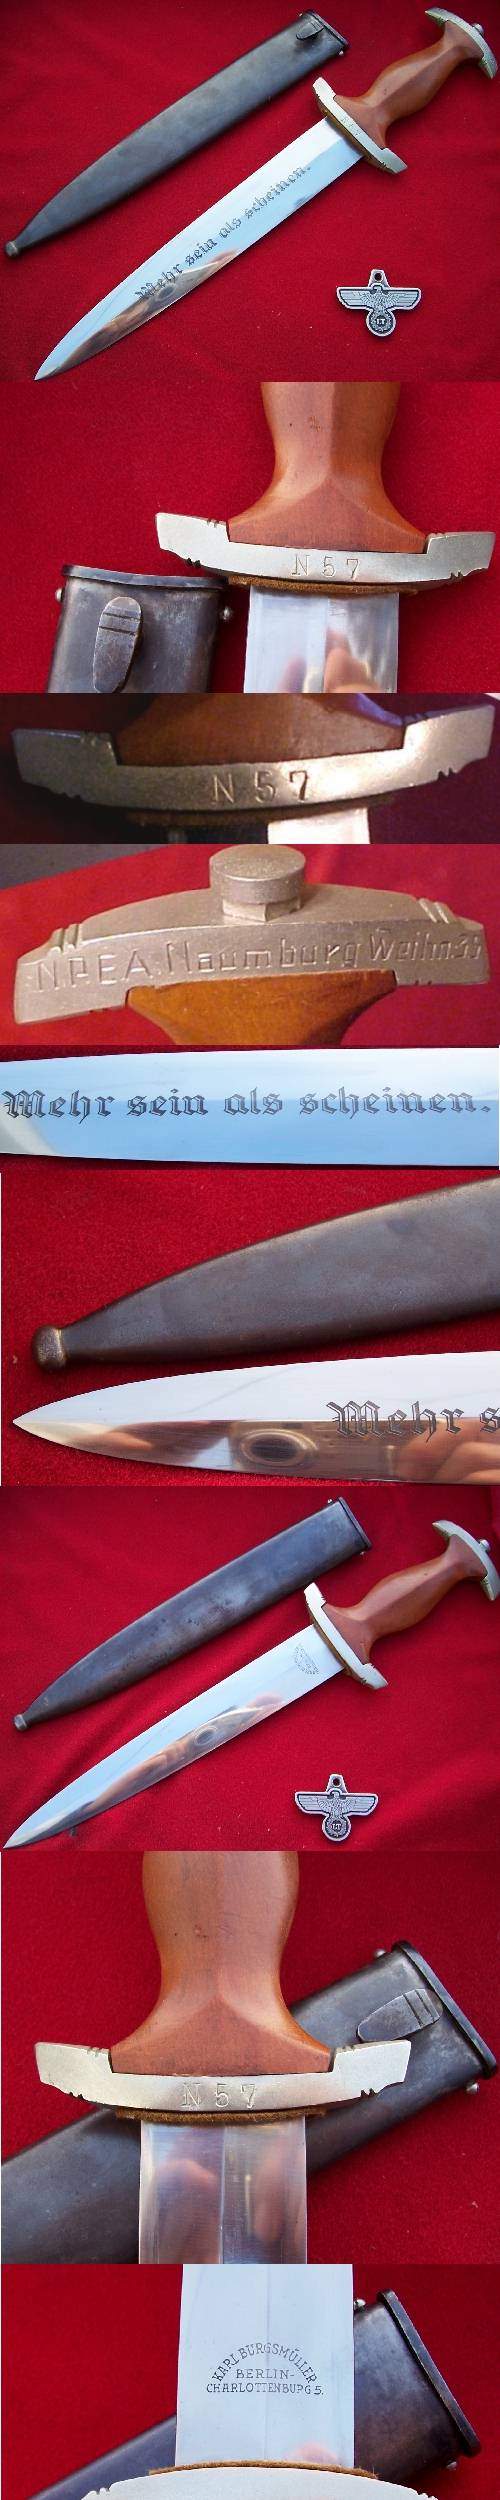 Graduation Marked NPEA Student Dagger in Reference